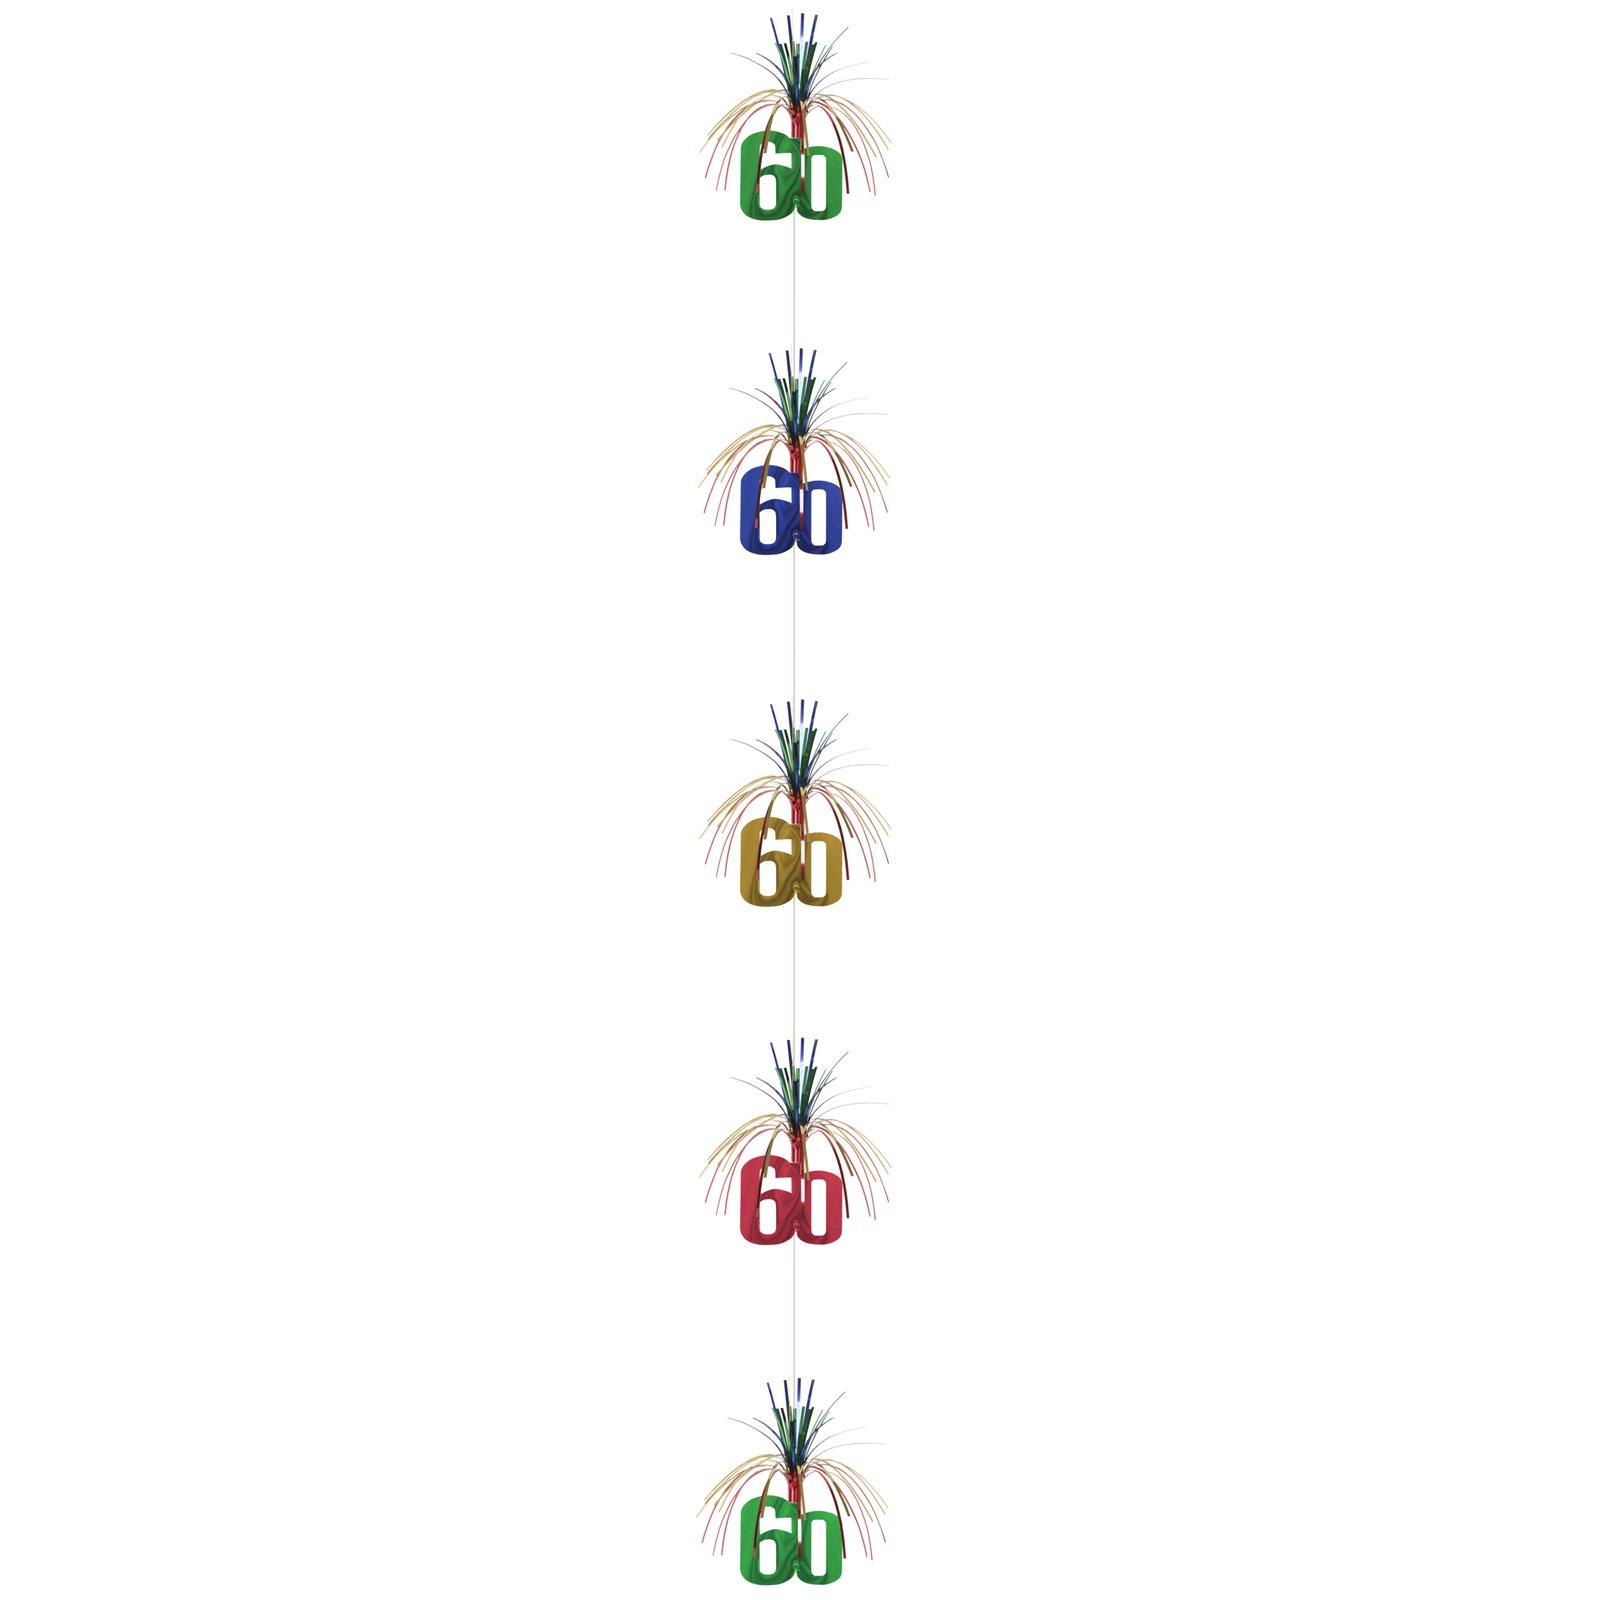 "60" Hanging Fireworks Cascades (2 count)